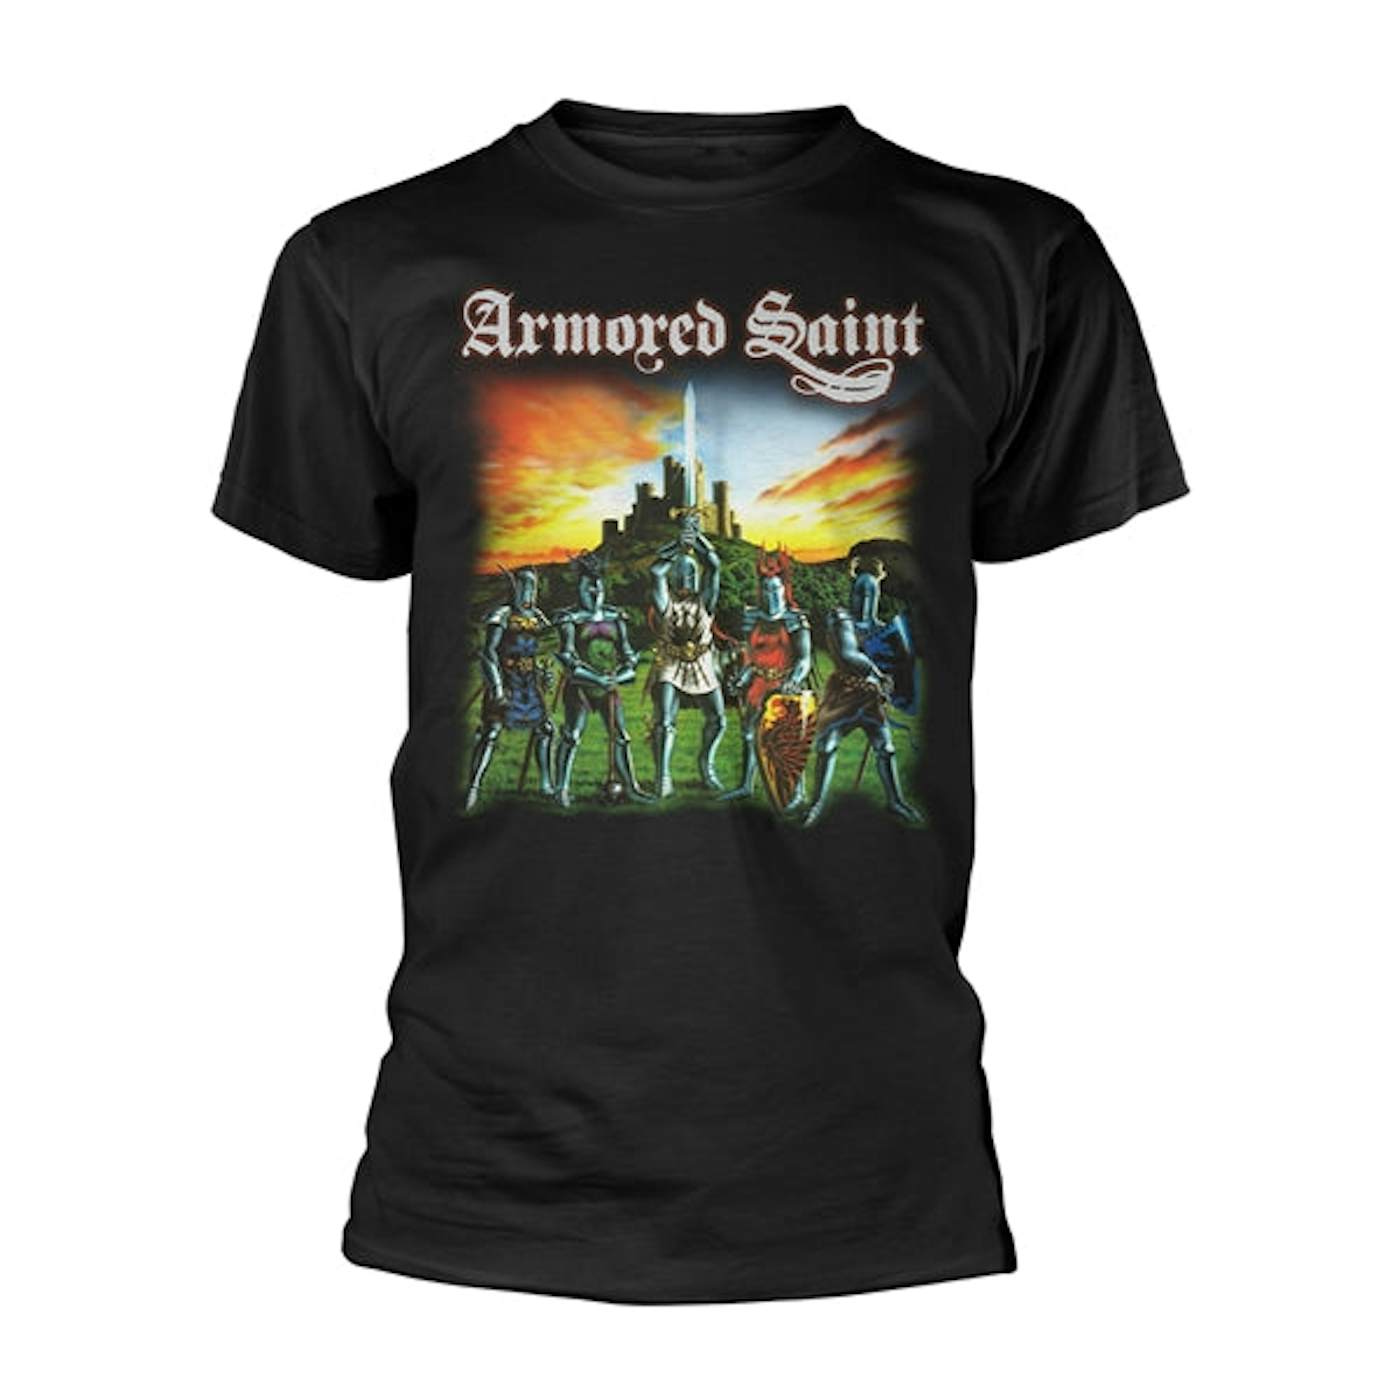 Armored Saint T Shirt - March Of The Saint